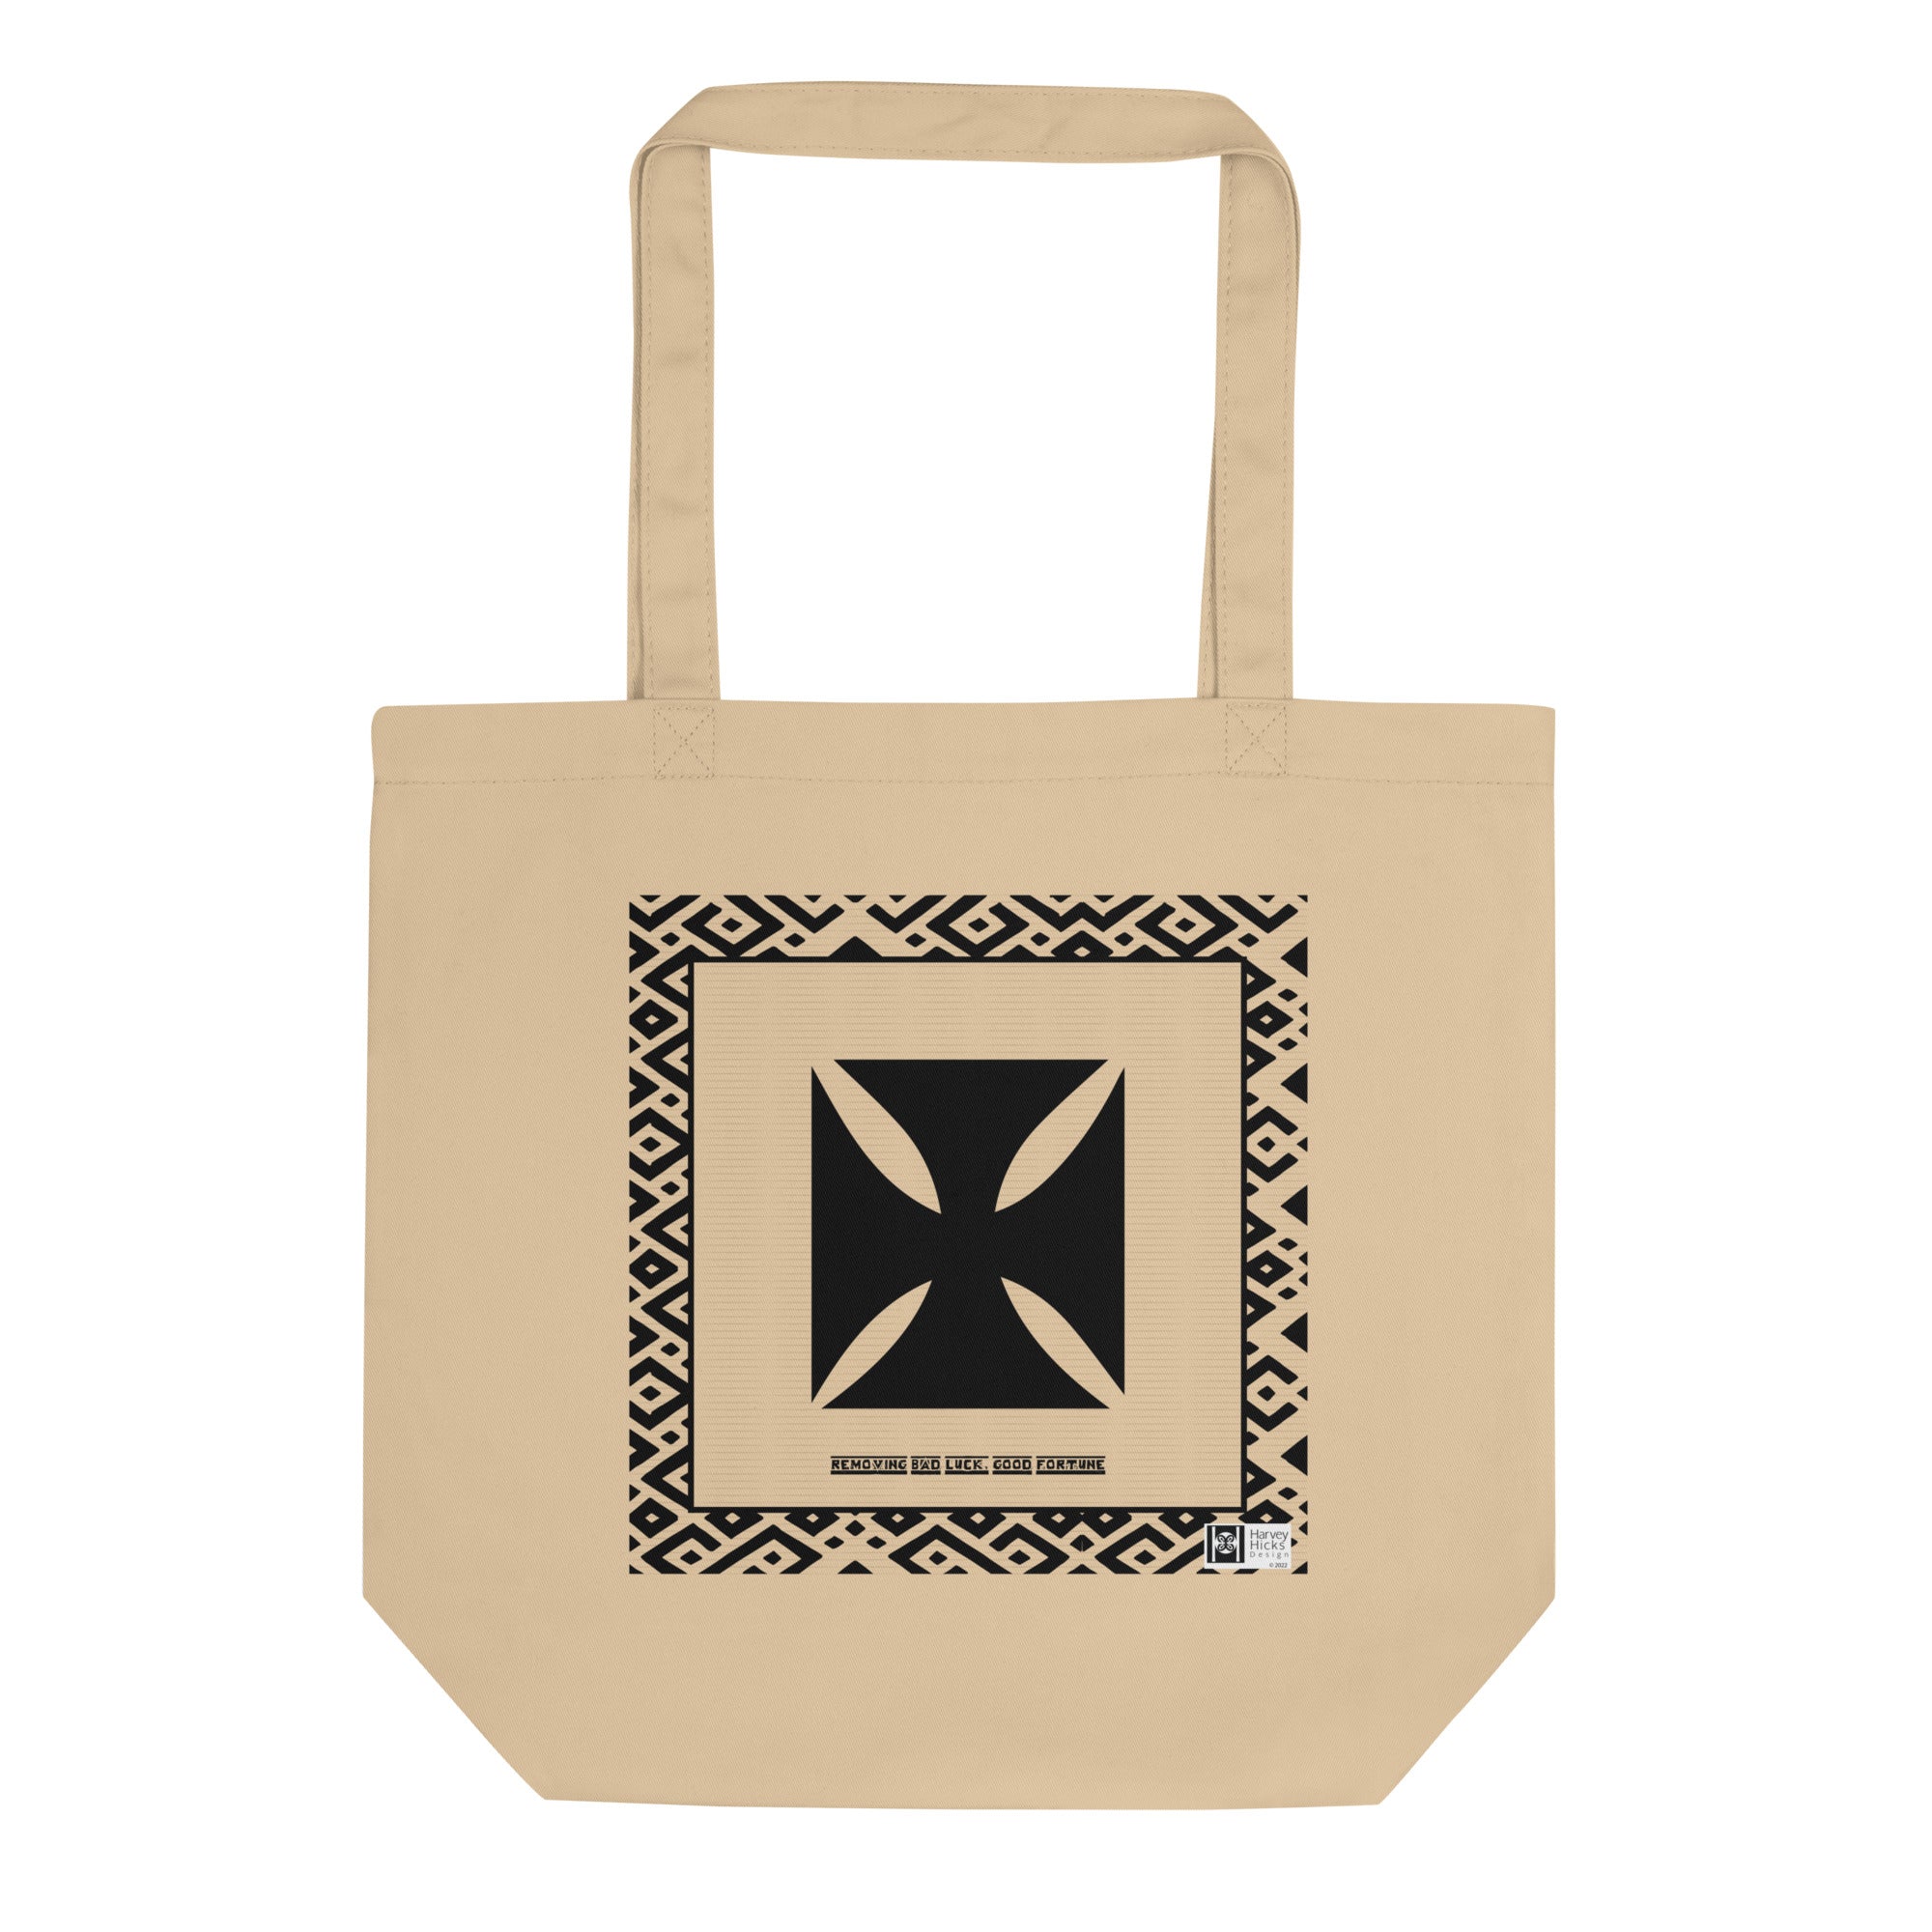 100% cotton Eco Tote Bag, featuring the Adinkra symbol for good fortune